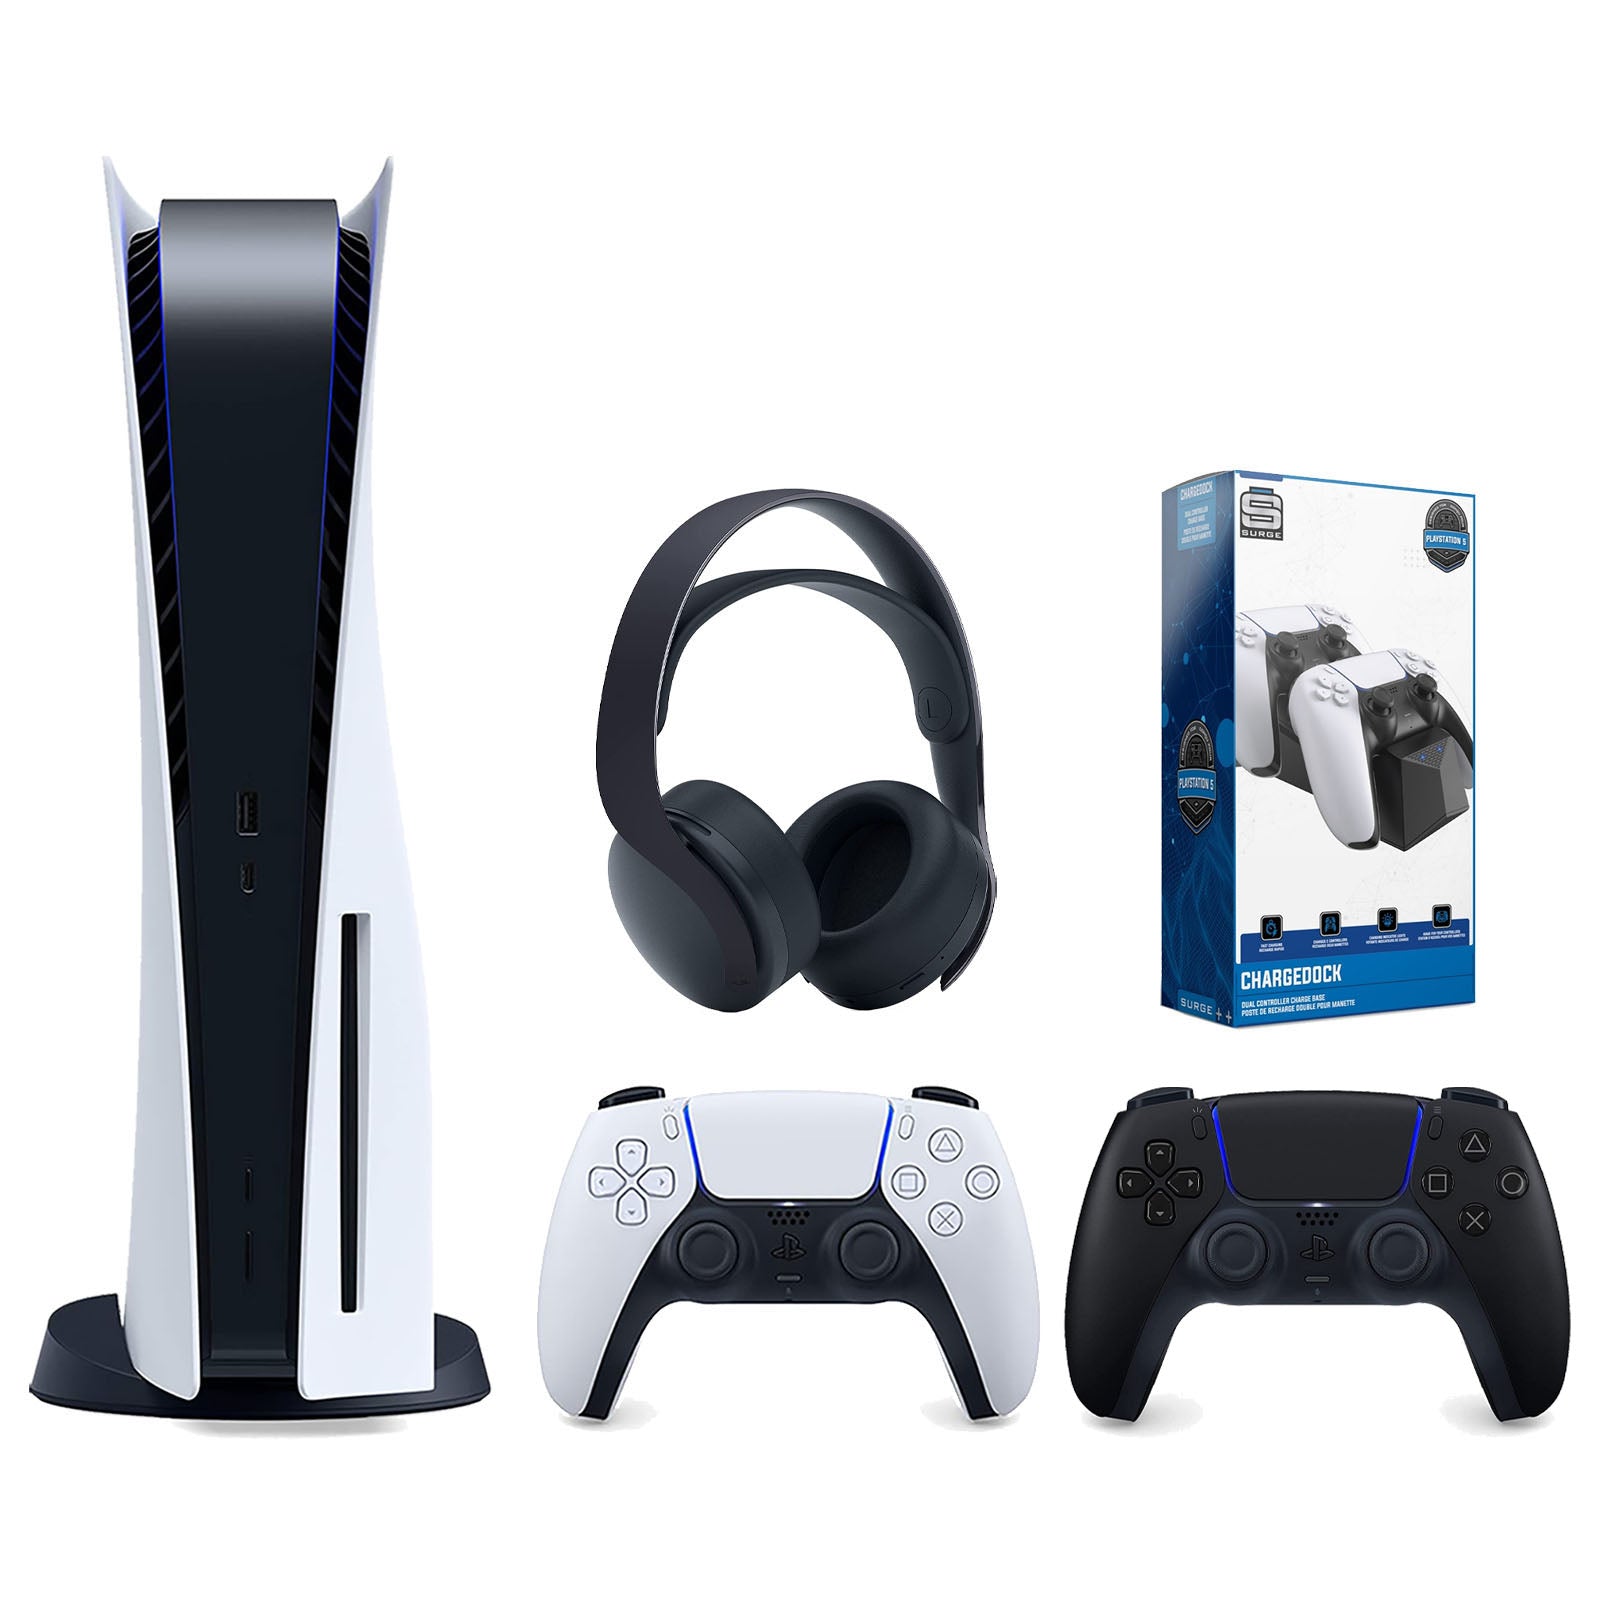 Sony Playstation 5 Disc Version Console with Extra Black Controller, Black PULSE 3D Headset and Surge Dual Controller Charge Dock Bundle - Pro-Distributing